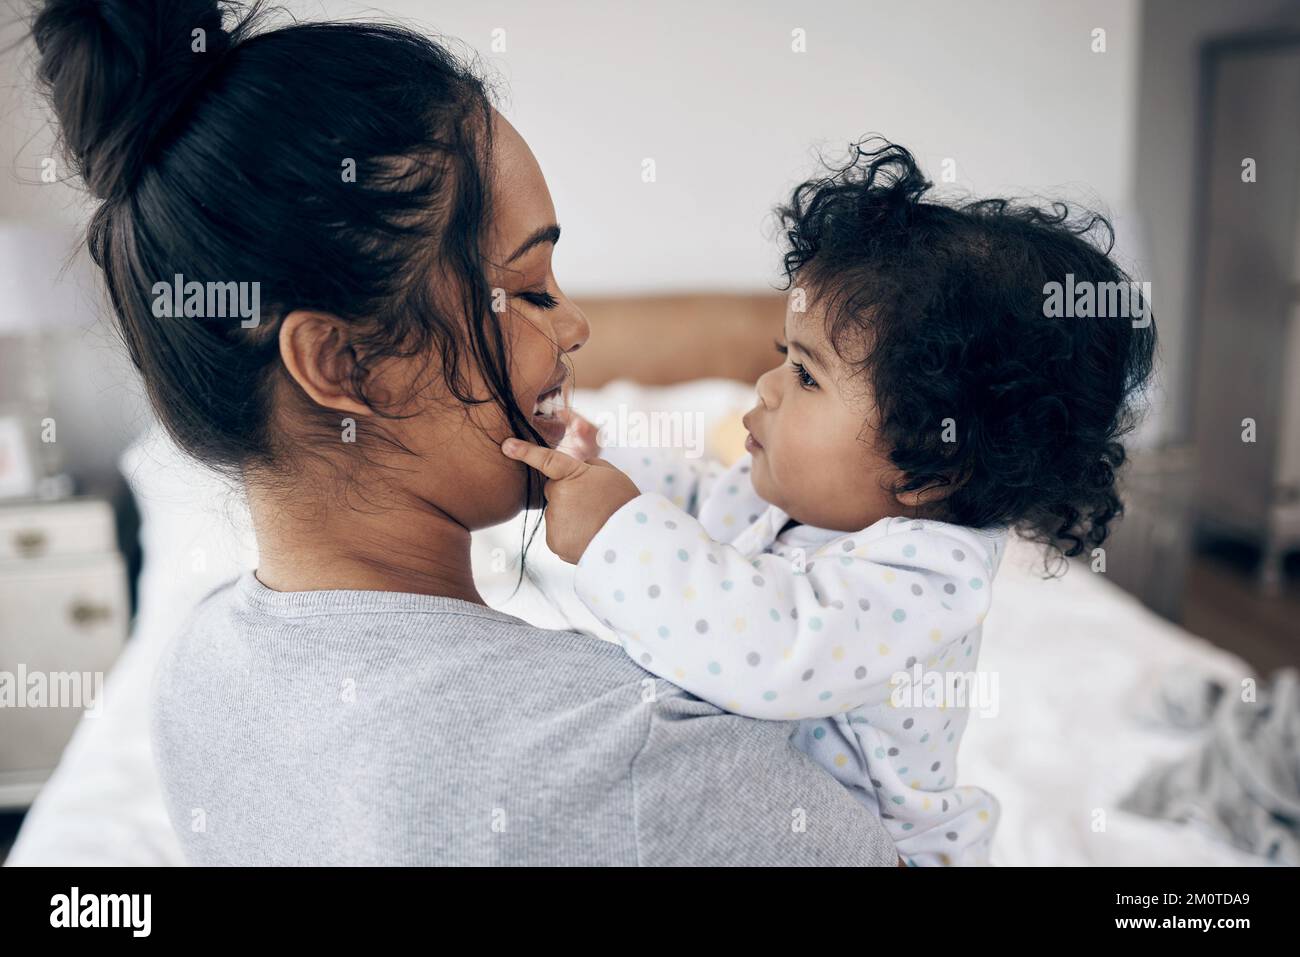 Unconditional. a mother holding her baby daughter at home. Stock Photo